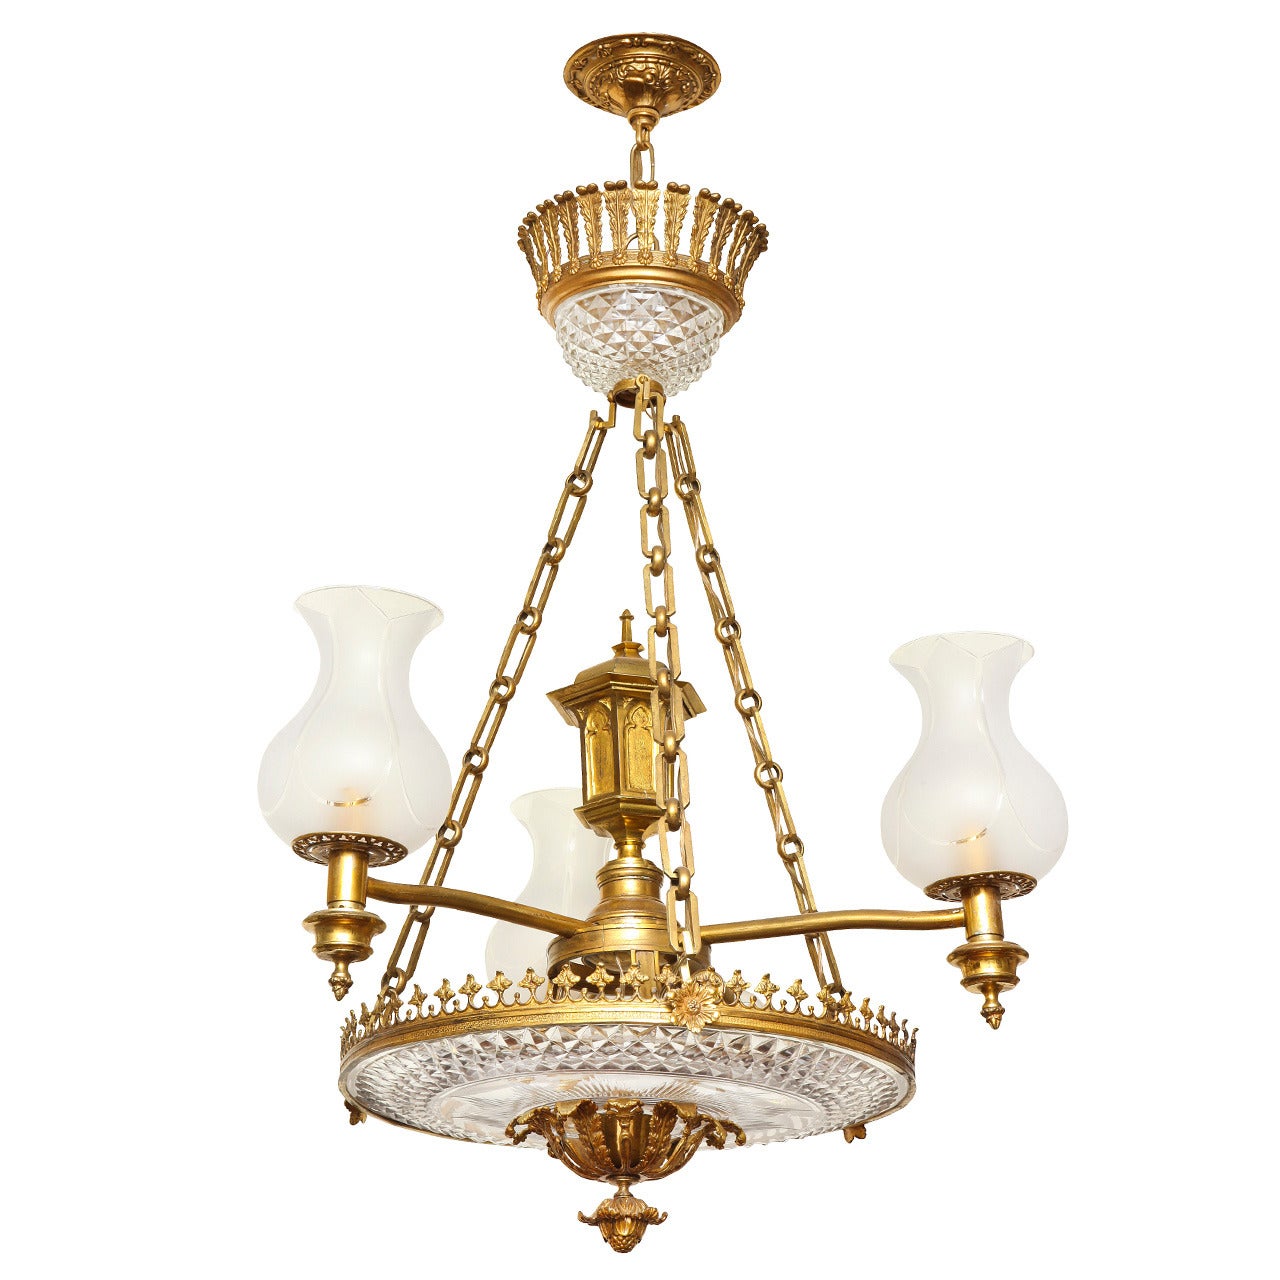 English Late Regency Colza Ceiling Fixture